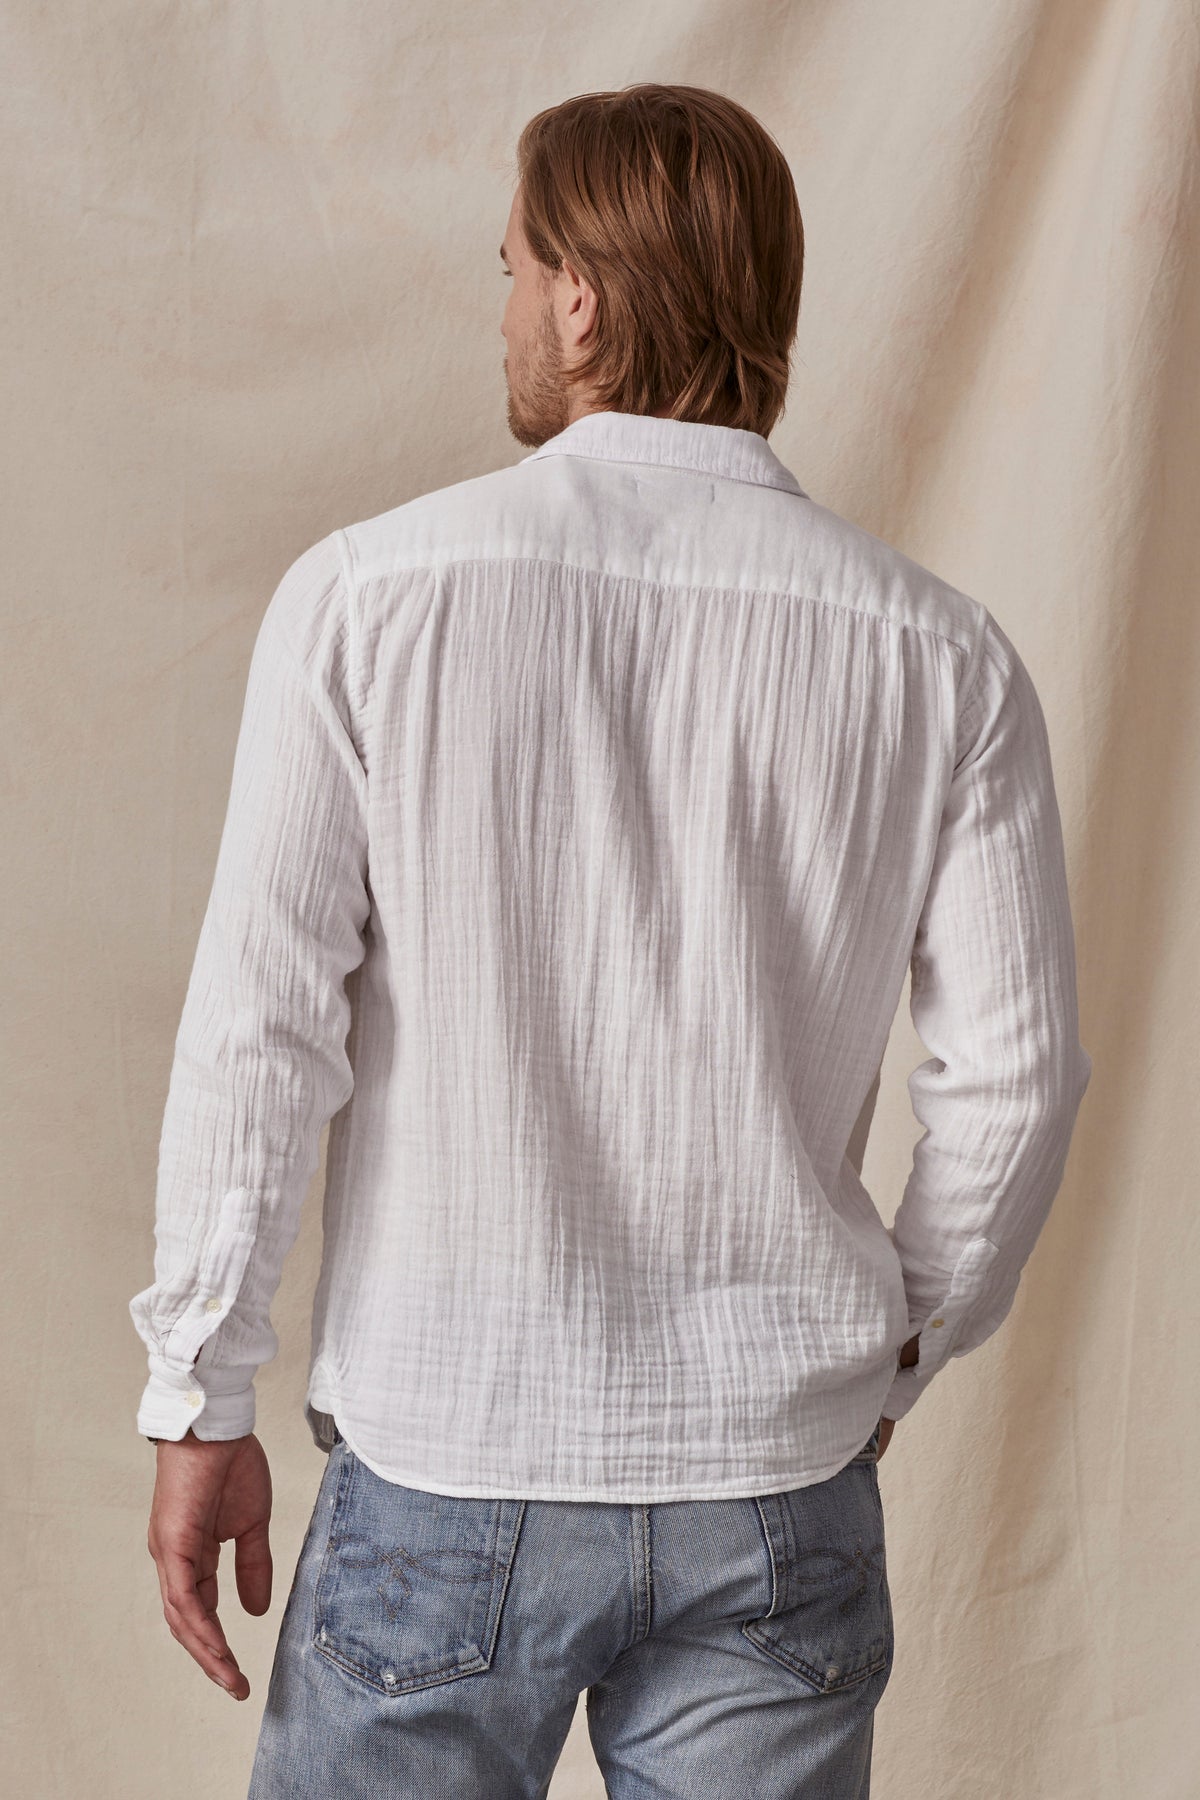 A man viewed from the back, wearing a Velvet by Graham & Spencer ELTON COTTON GAUZE BUTTON-UP SHIRT and blue jeans, against a neutral beige background.-36009391882433